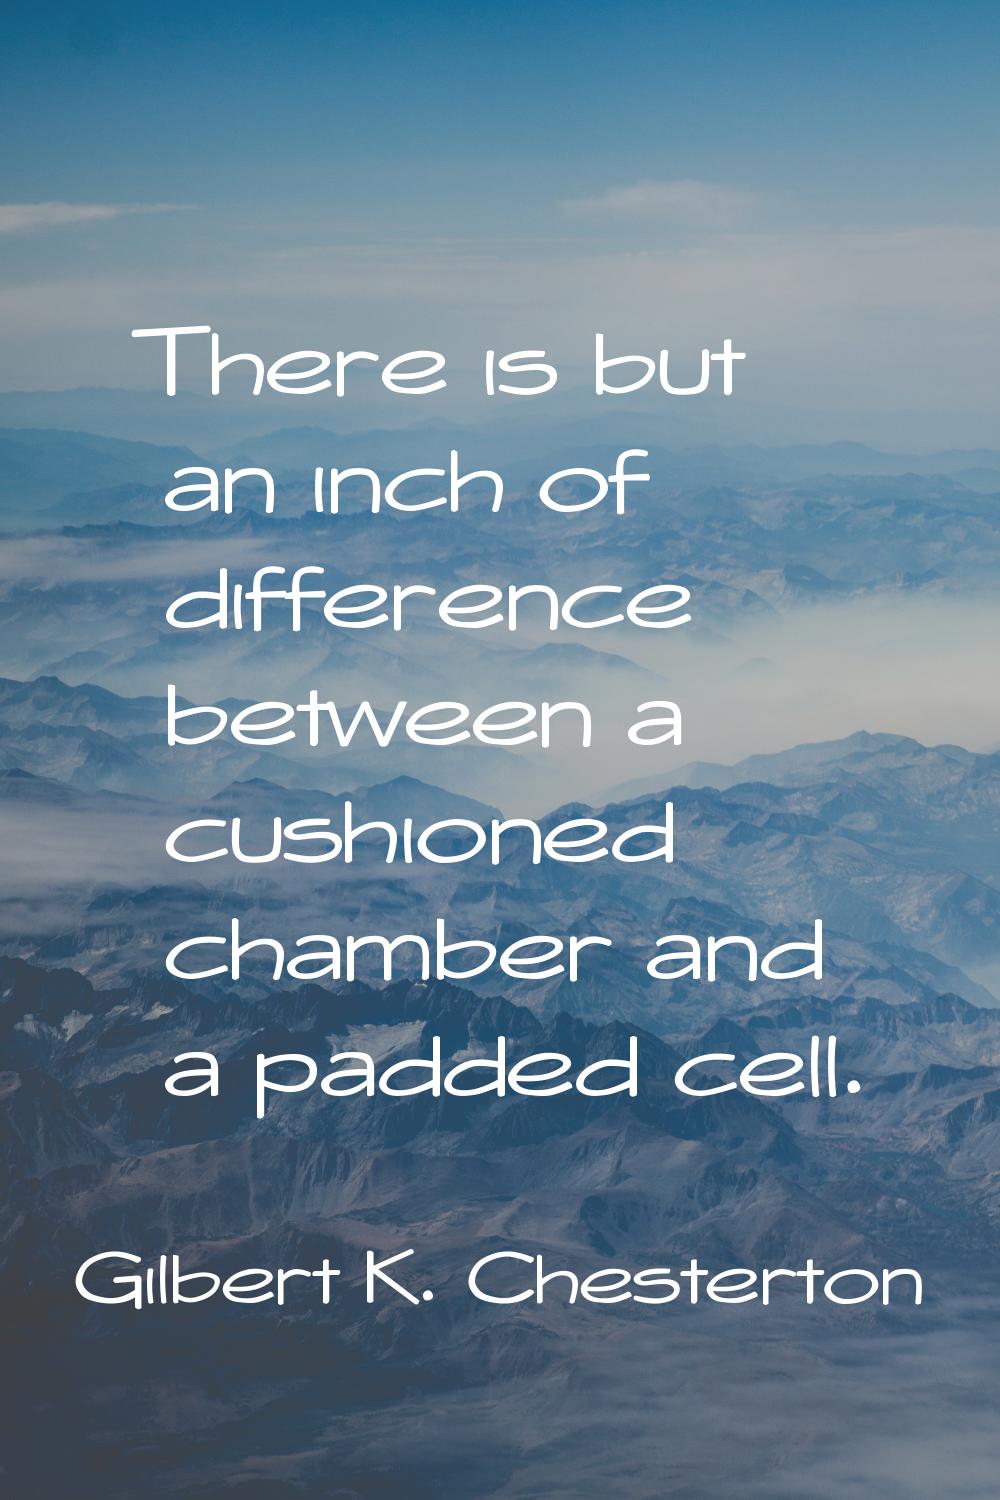 There is but an inch of difference between a cushioned chamber and a padded cell.